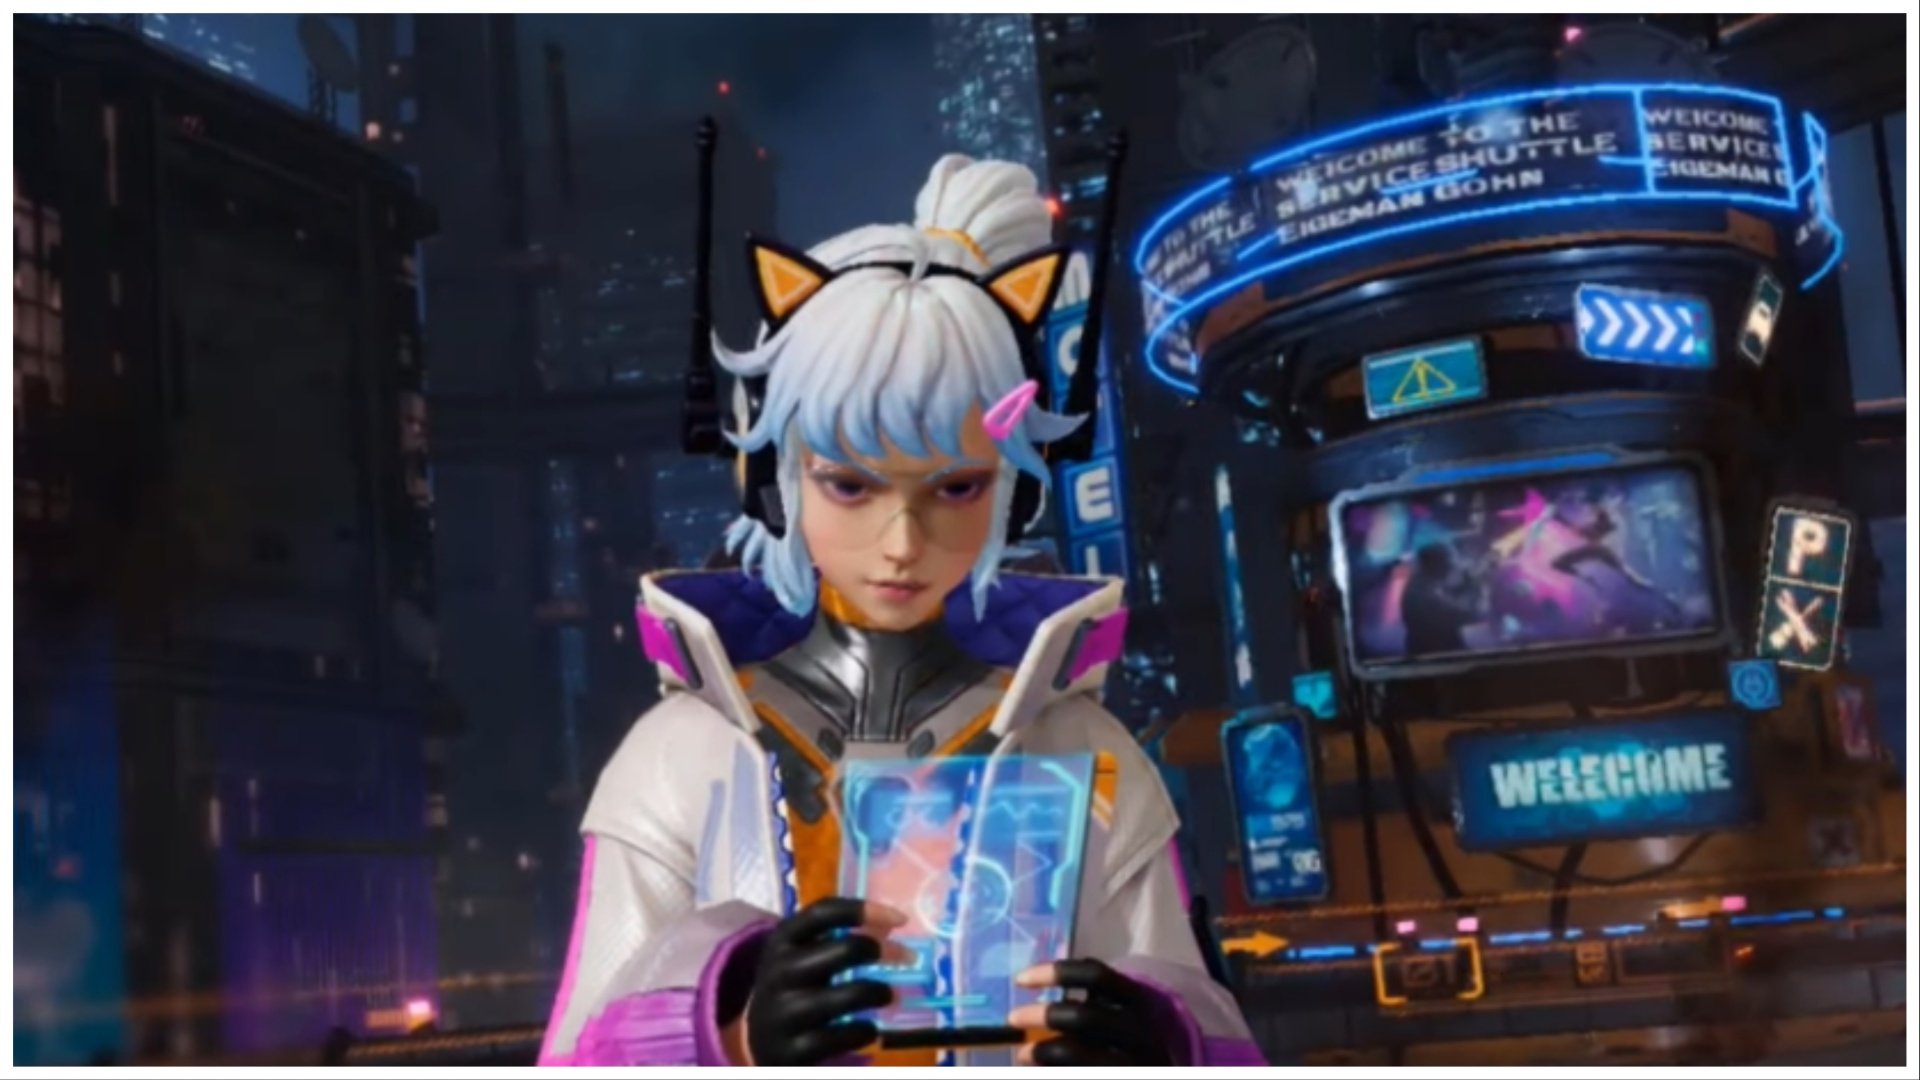 the image shows a white haired girl with cat ear headphones checking a futuristic phone that looks like a thin plain blue screen